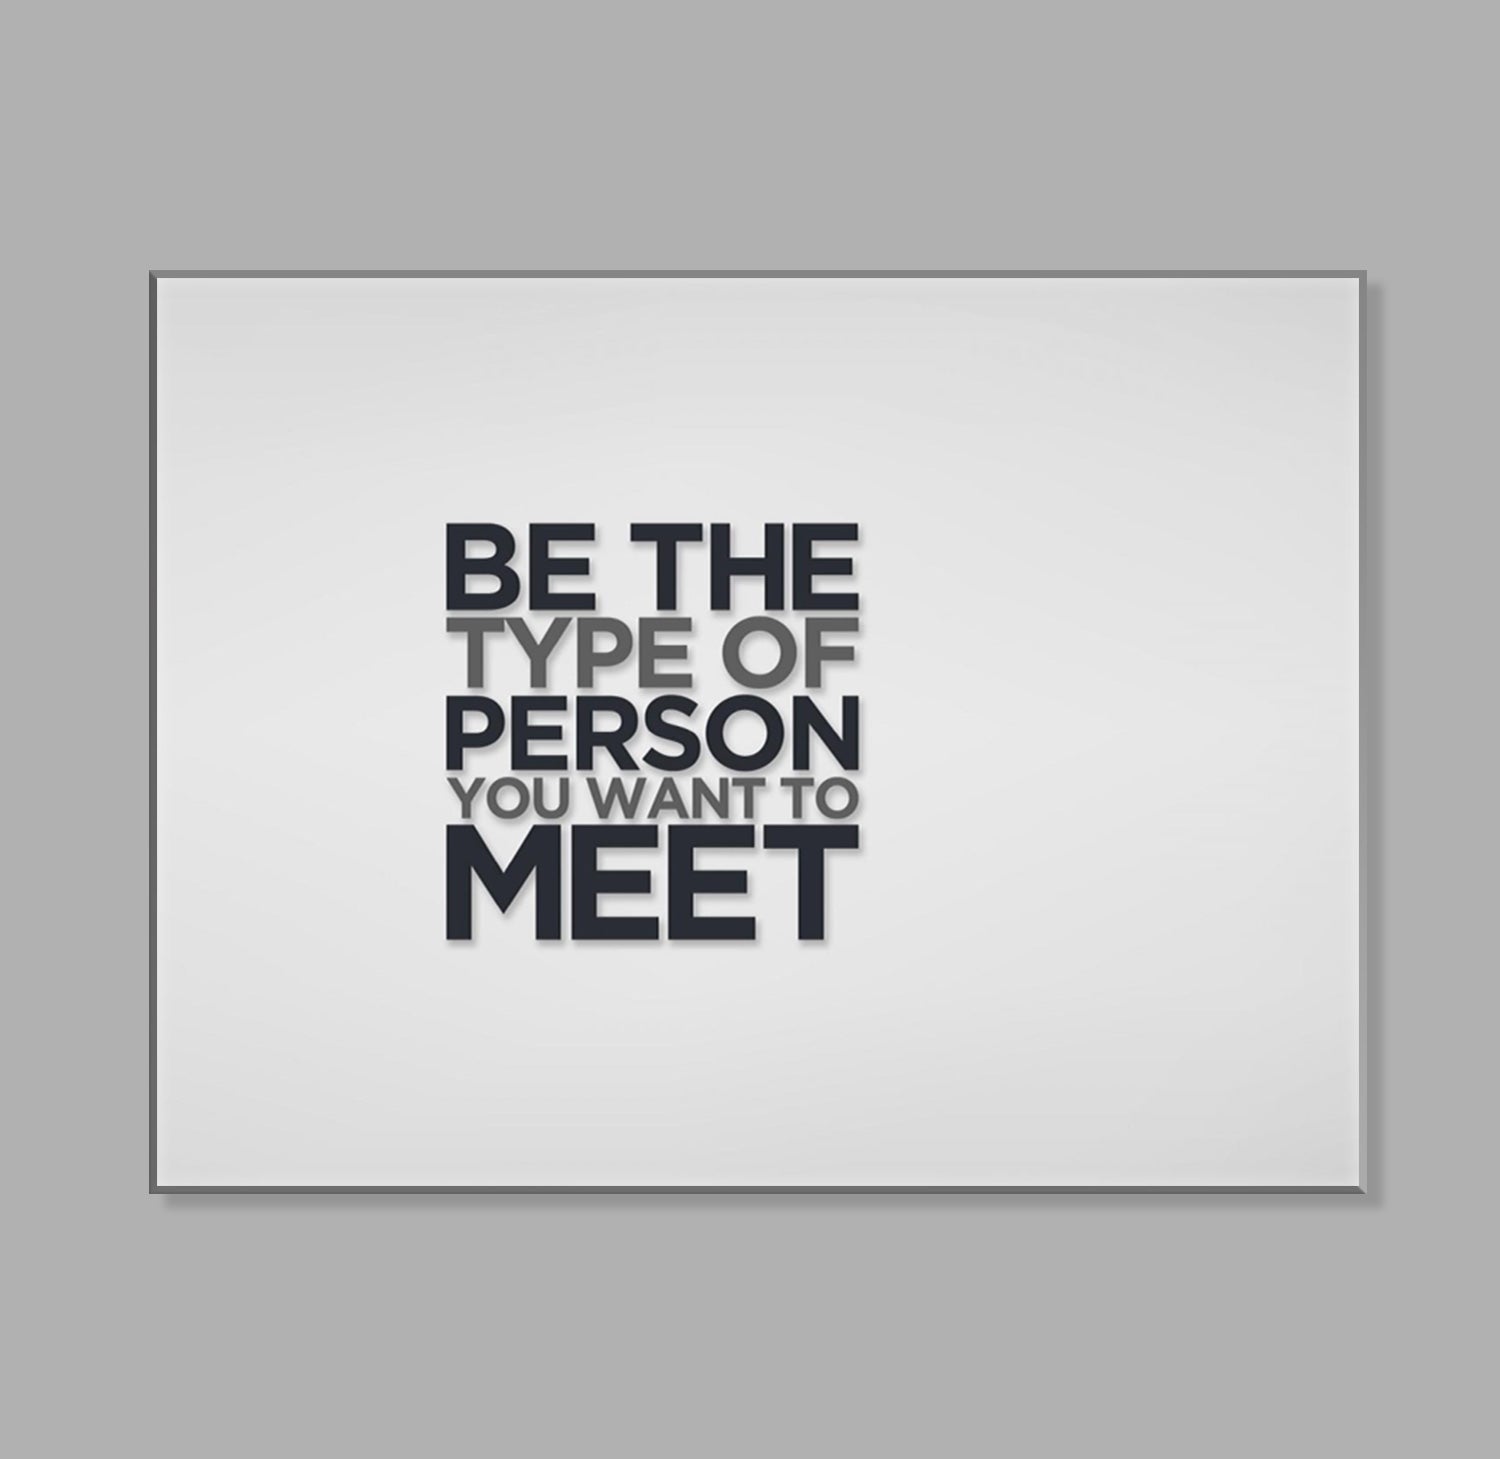 " Be The Type of Person" LED Leuchtbild